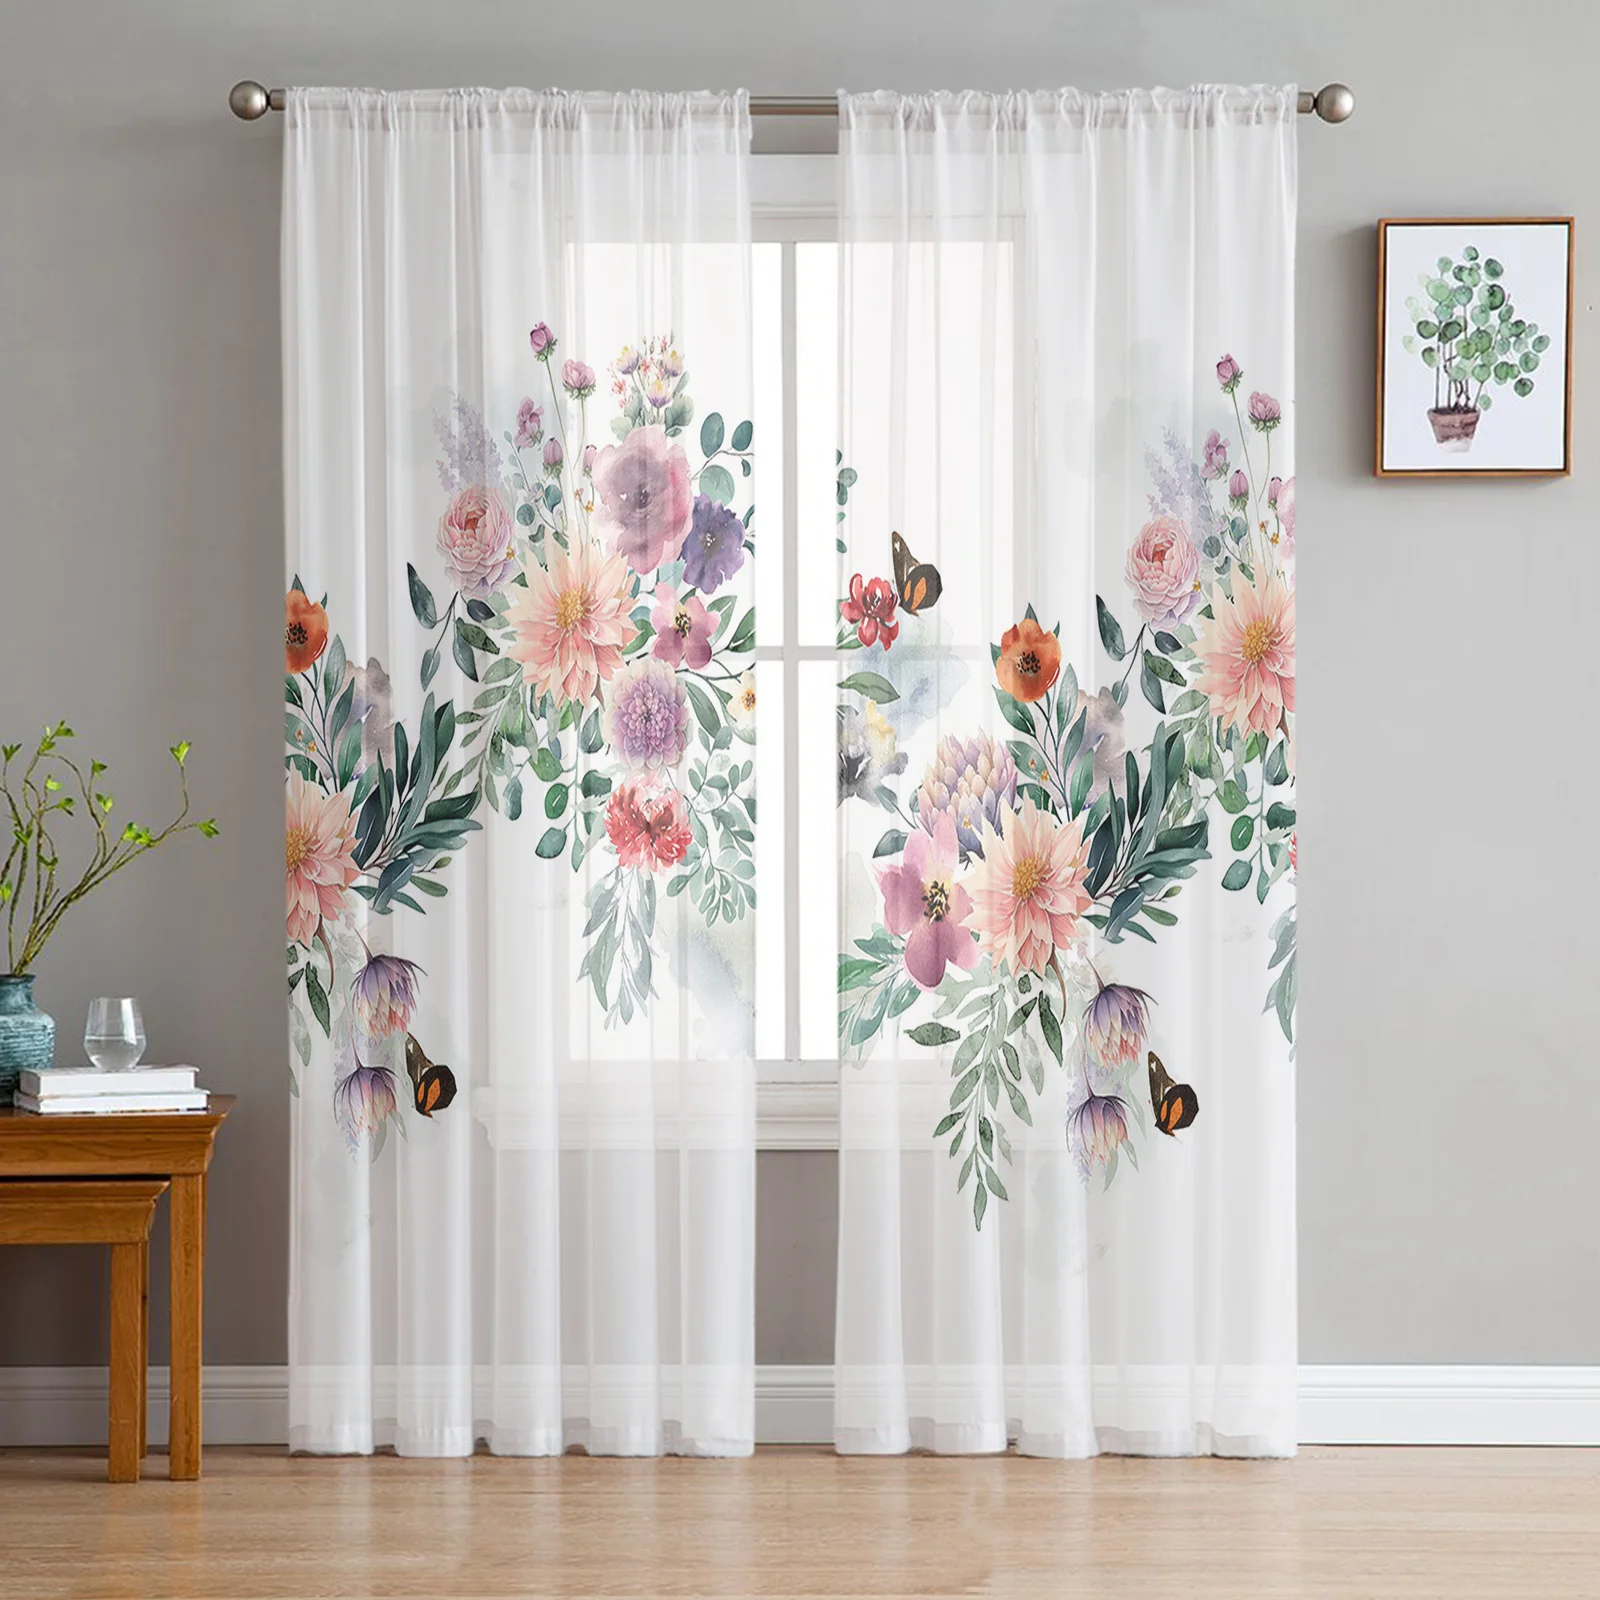 

Watercolor Leaves Plants Flowers Butterflies Tulle Voile Curtains for Bedroom Living Room Window Curtain Sheer Organza Drapes